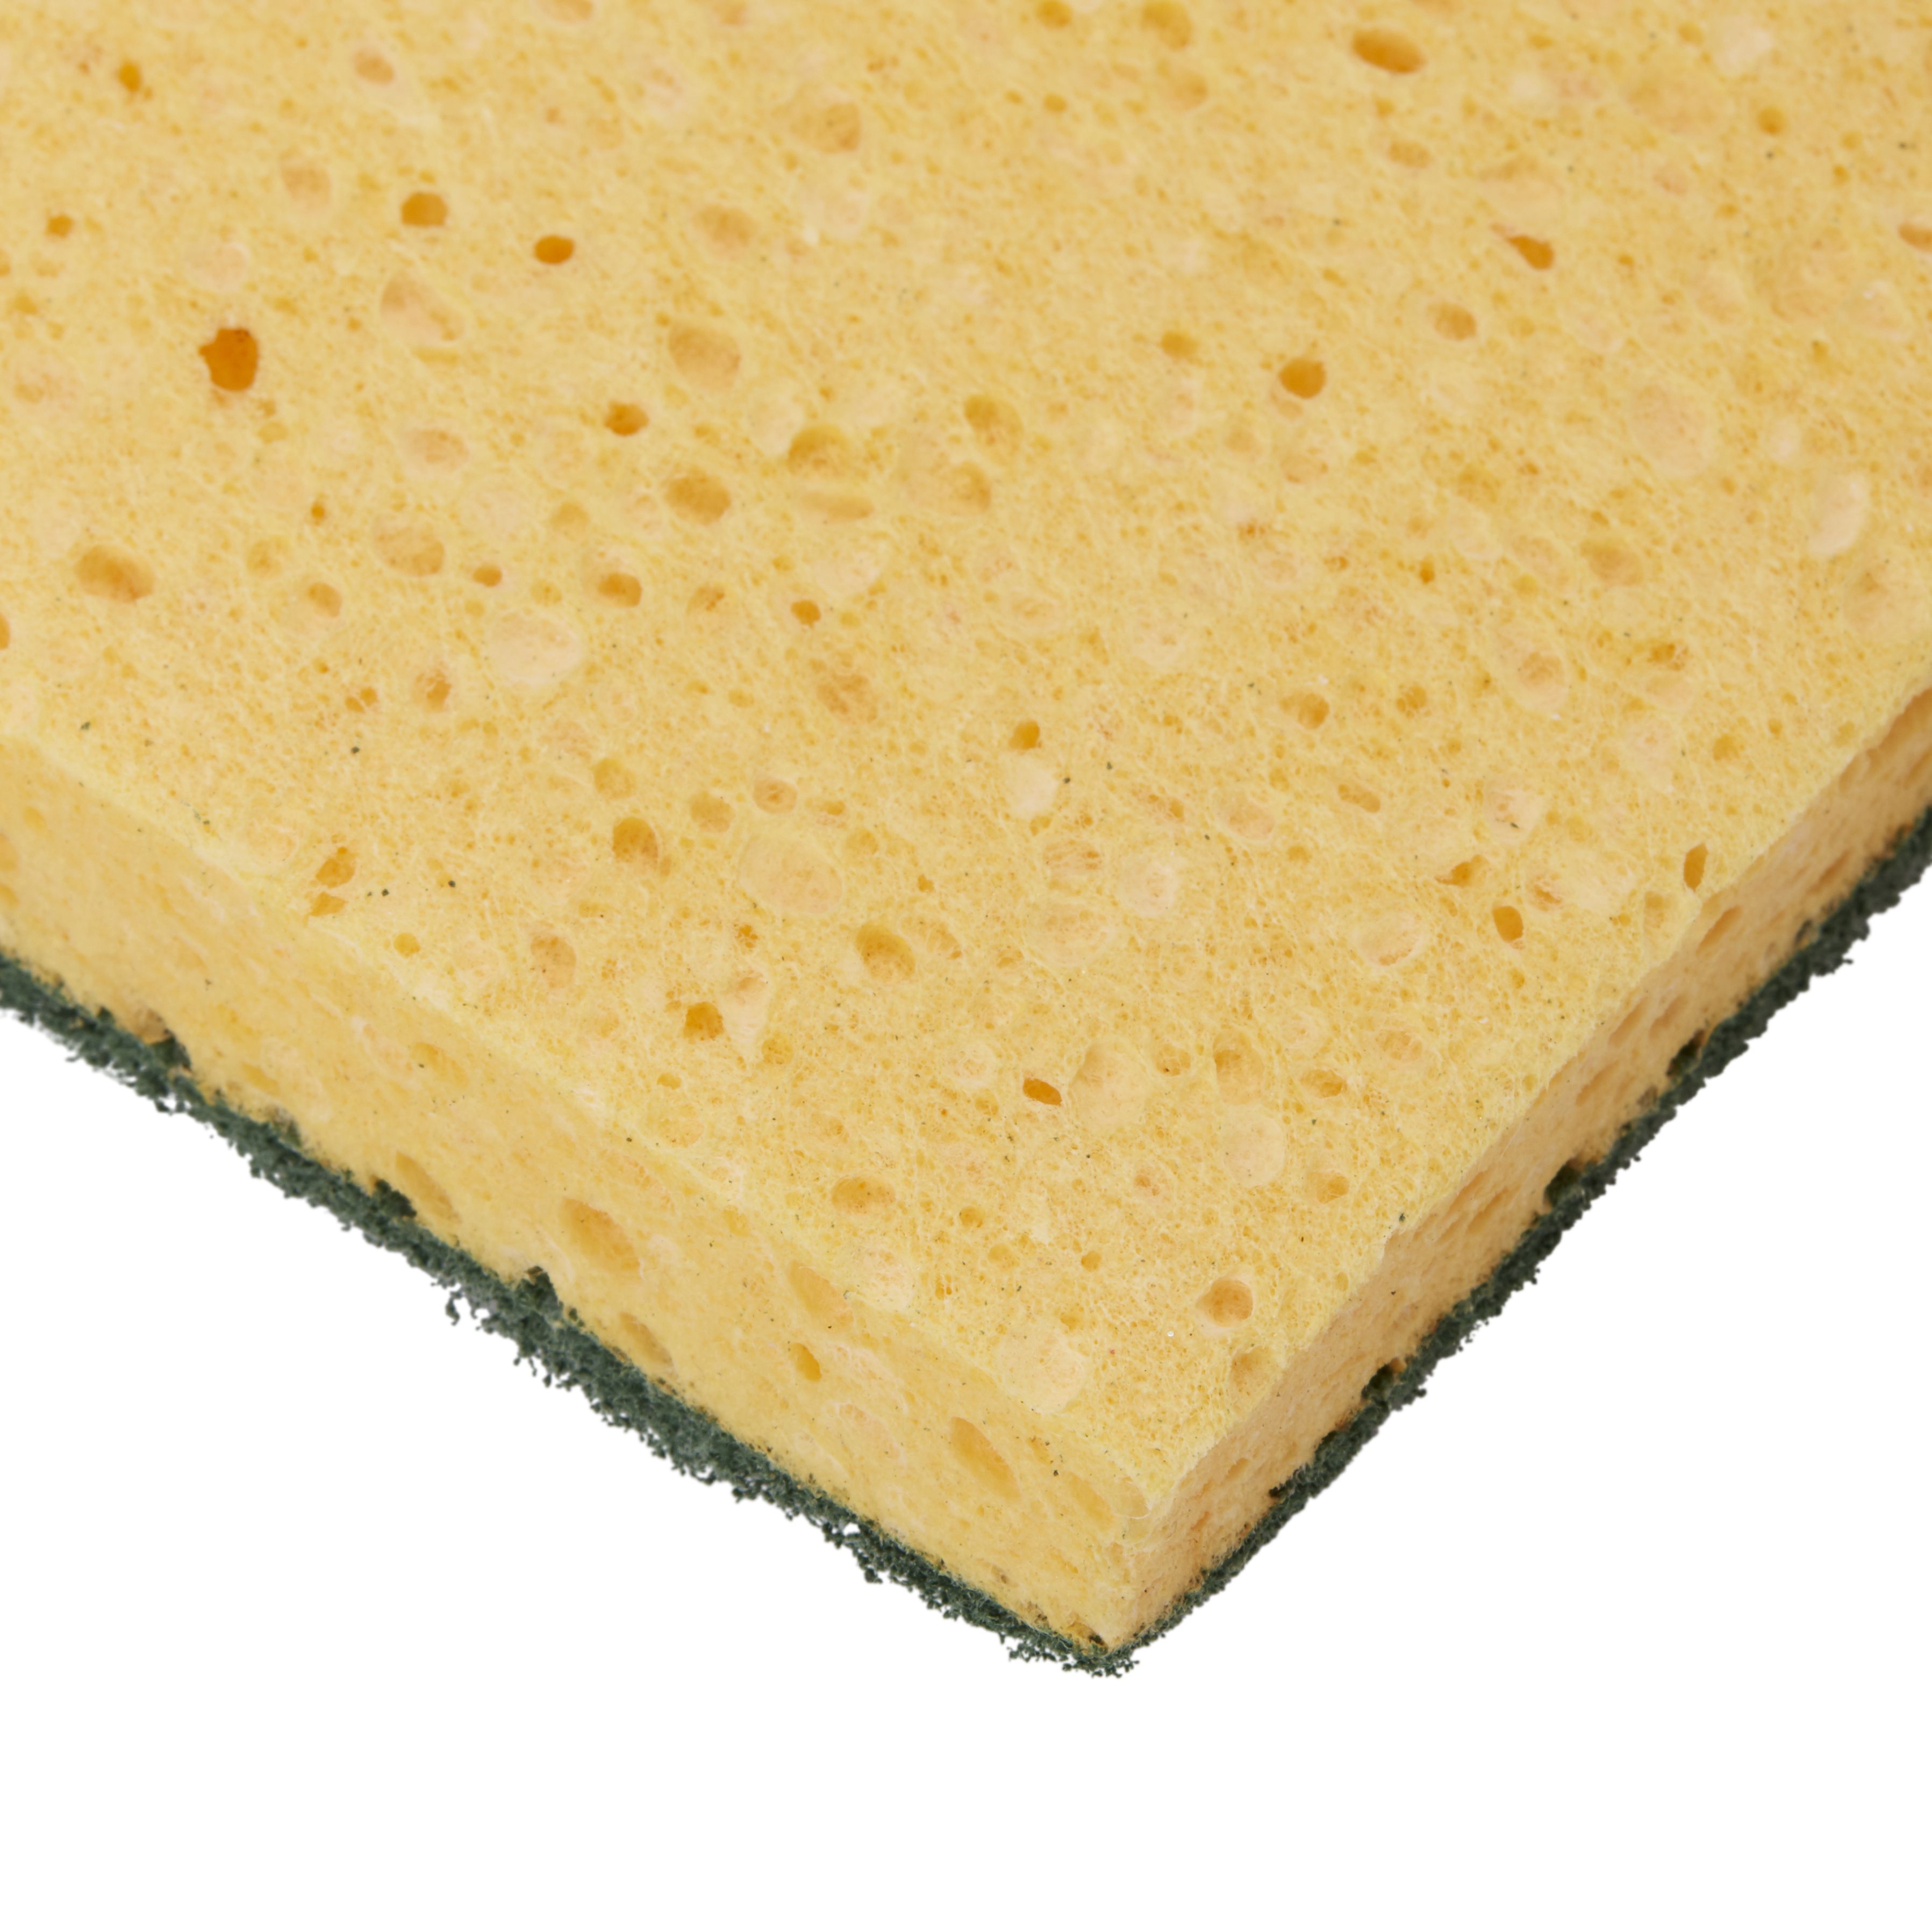 Cellulose & synthetic Sponge scourer, Pack of 10